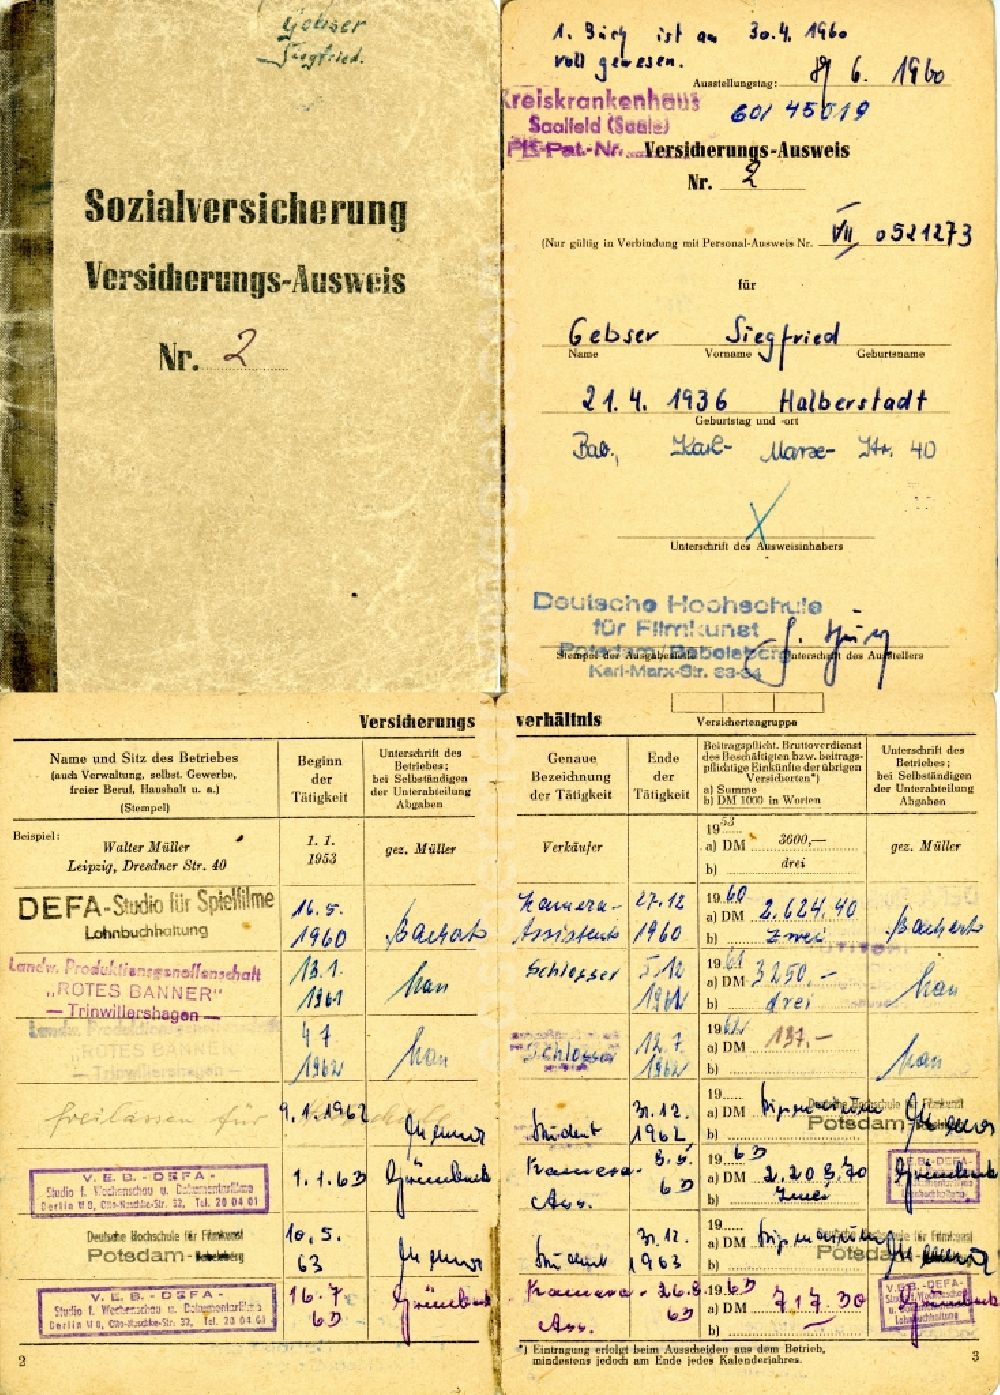 Potsdam: Reproduction Social security card issued in Potsdam in the state Brandenburg on the territory of the former GDR, German Democratic Republic